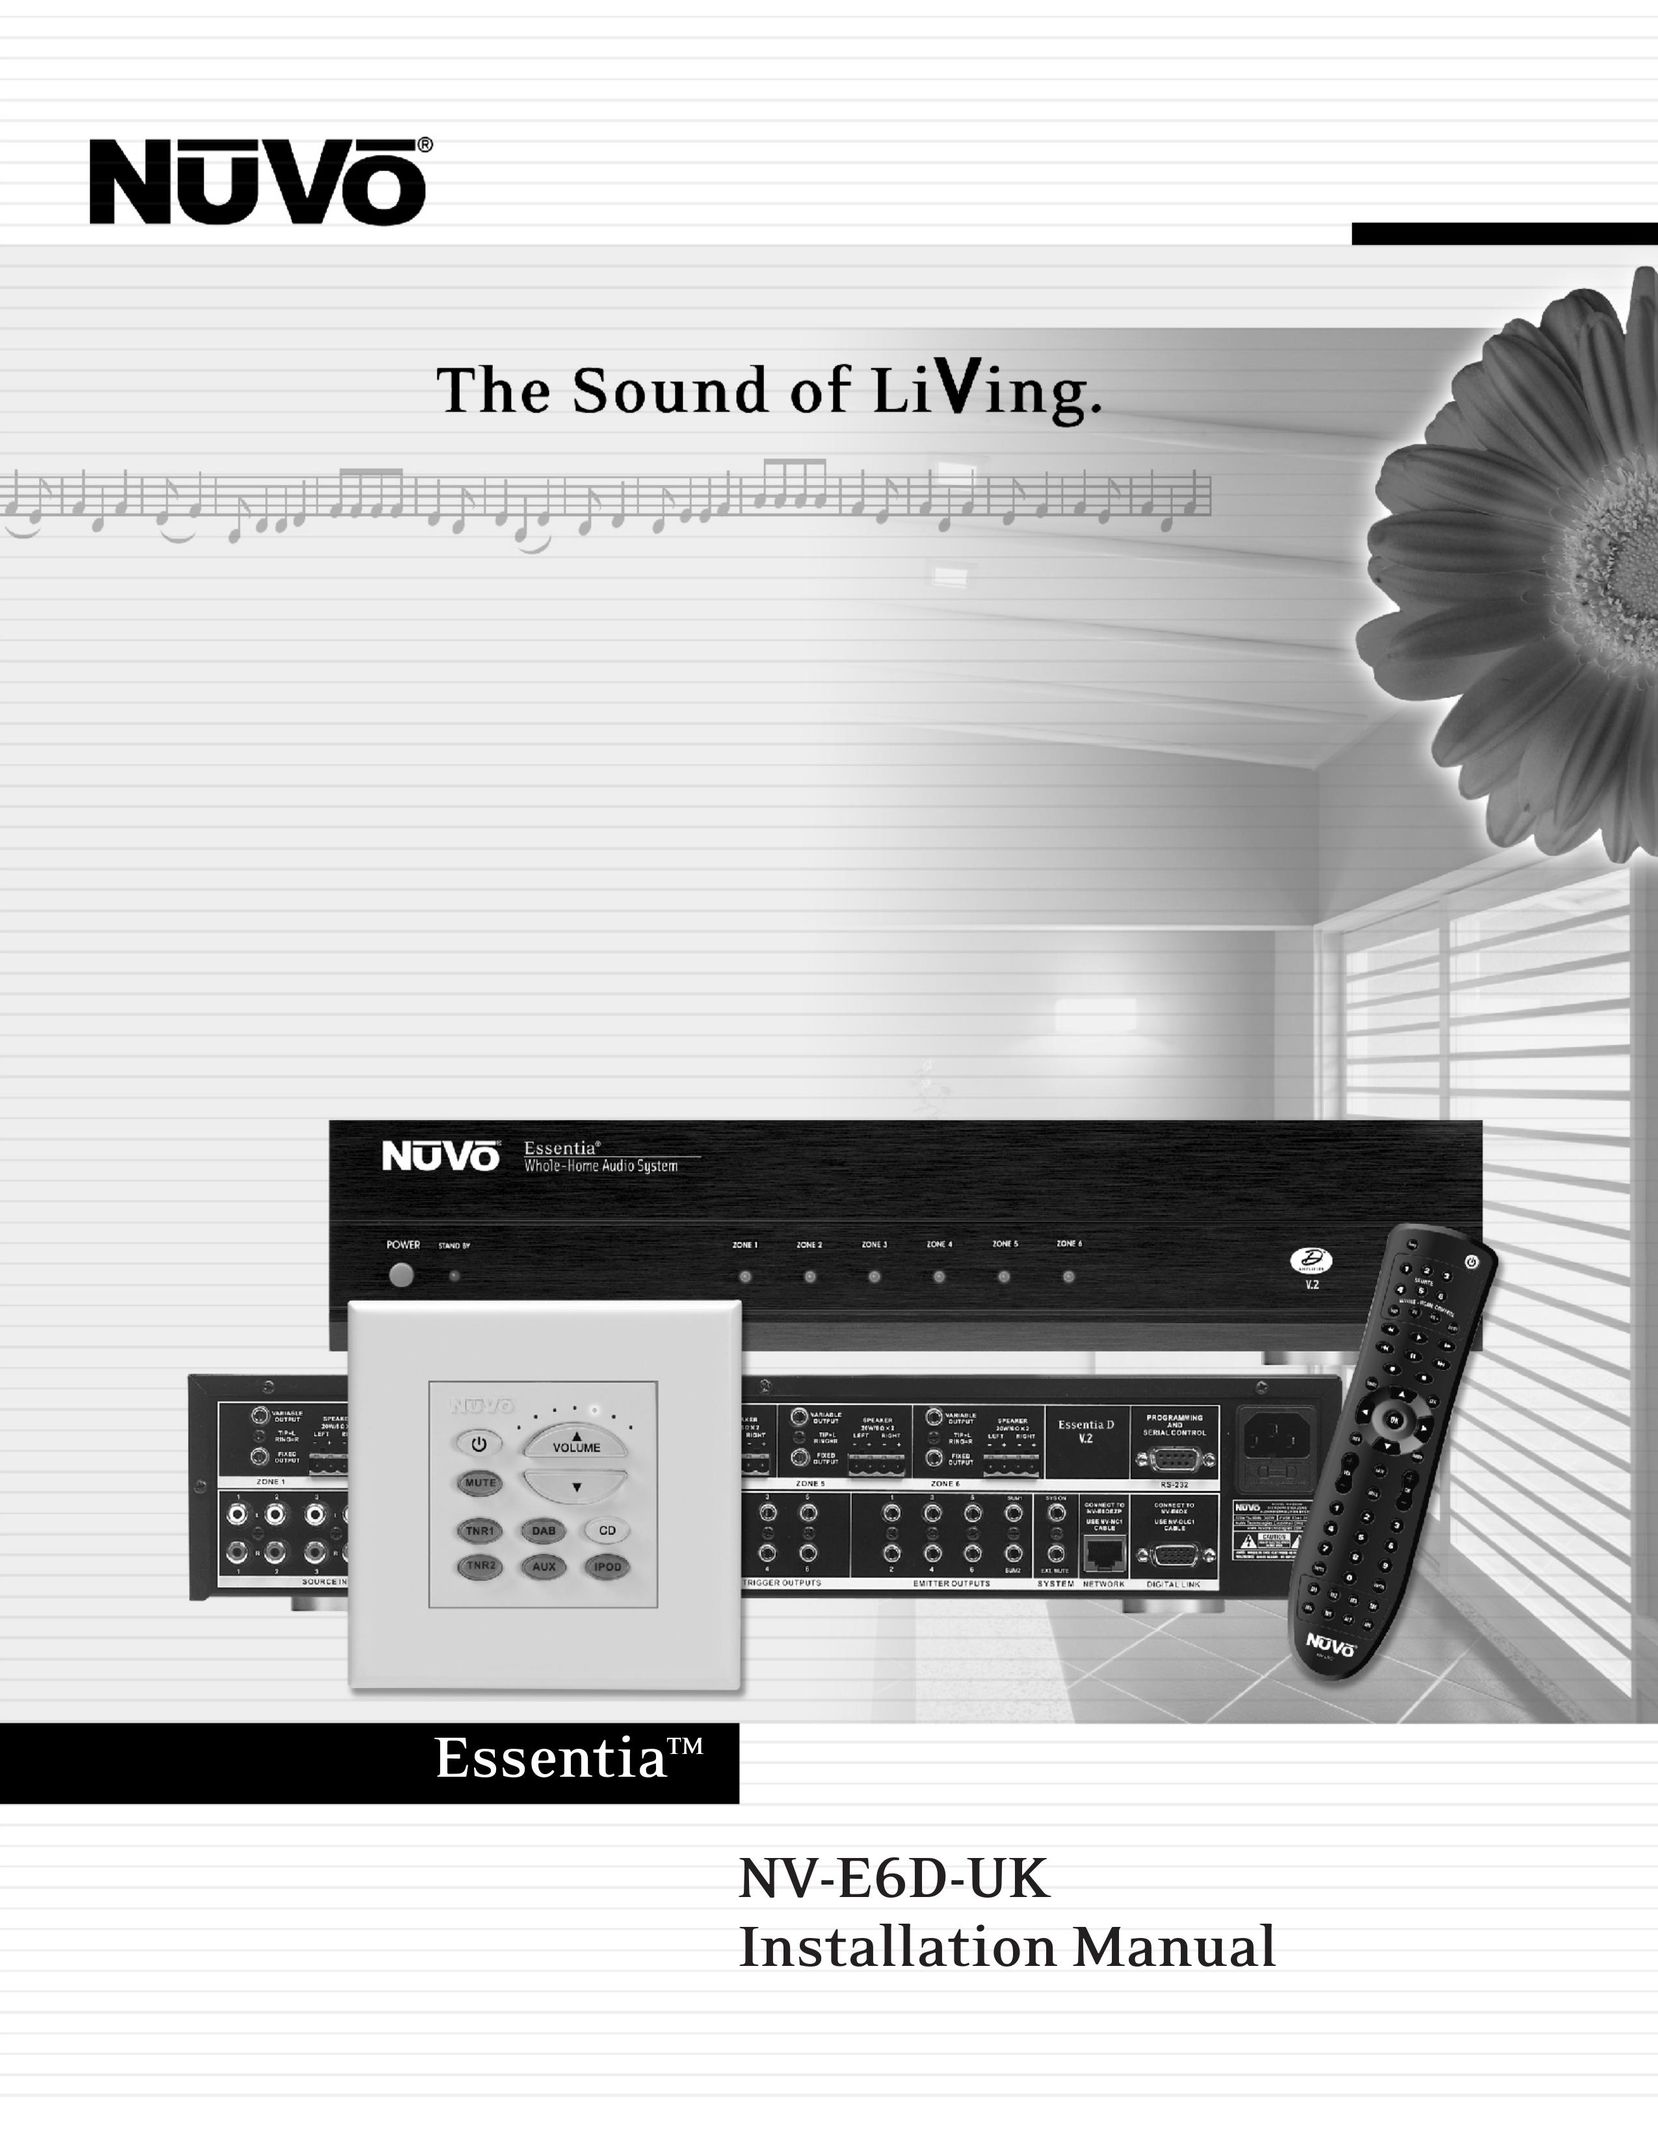 Nuvo NV-E6D-UK Home Theater System User Manual